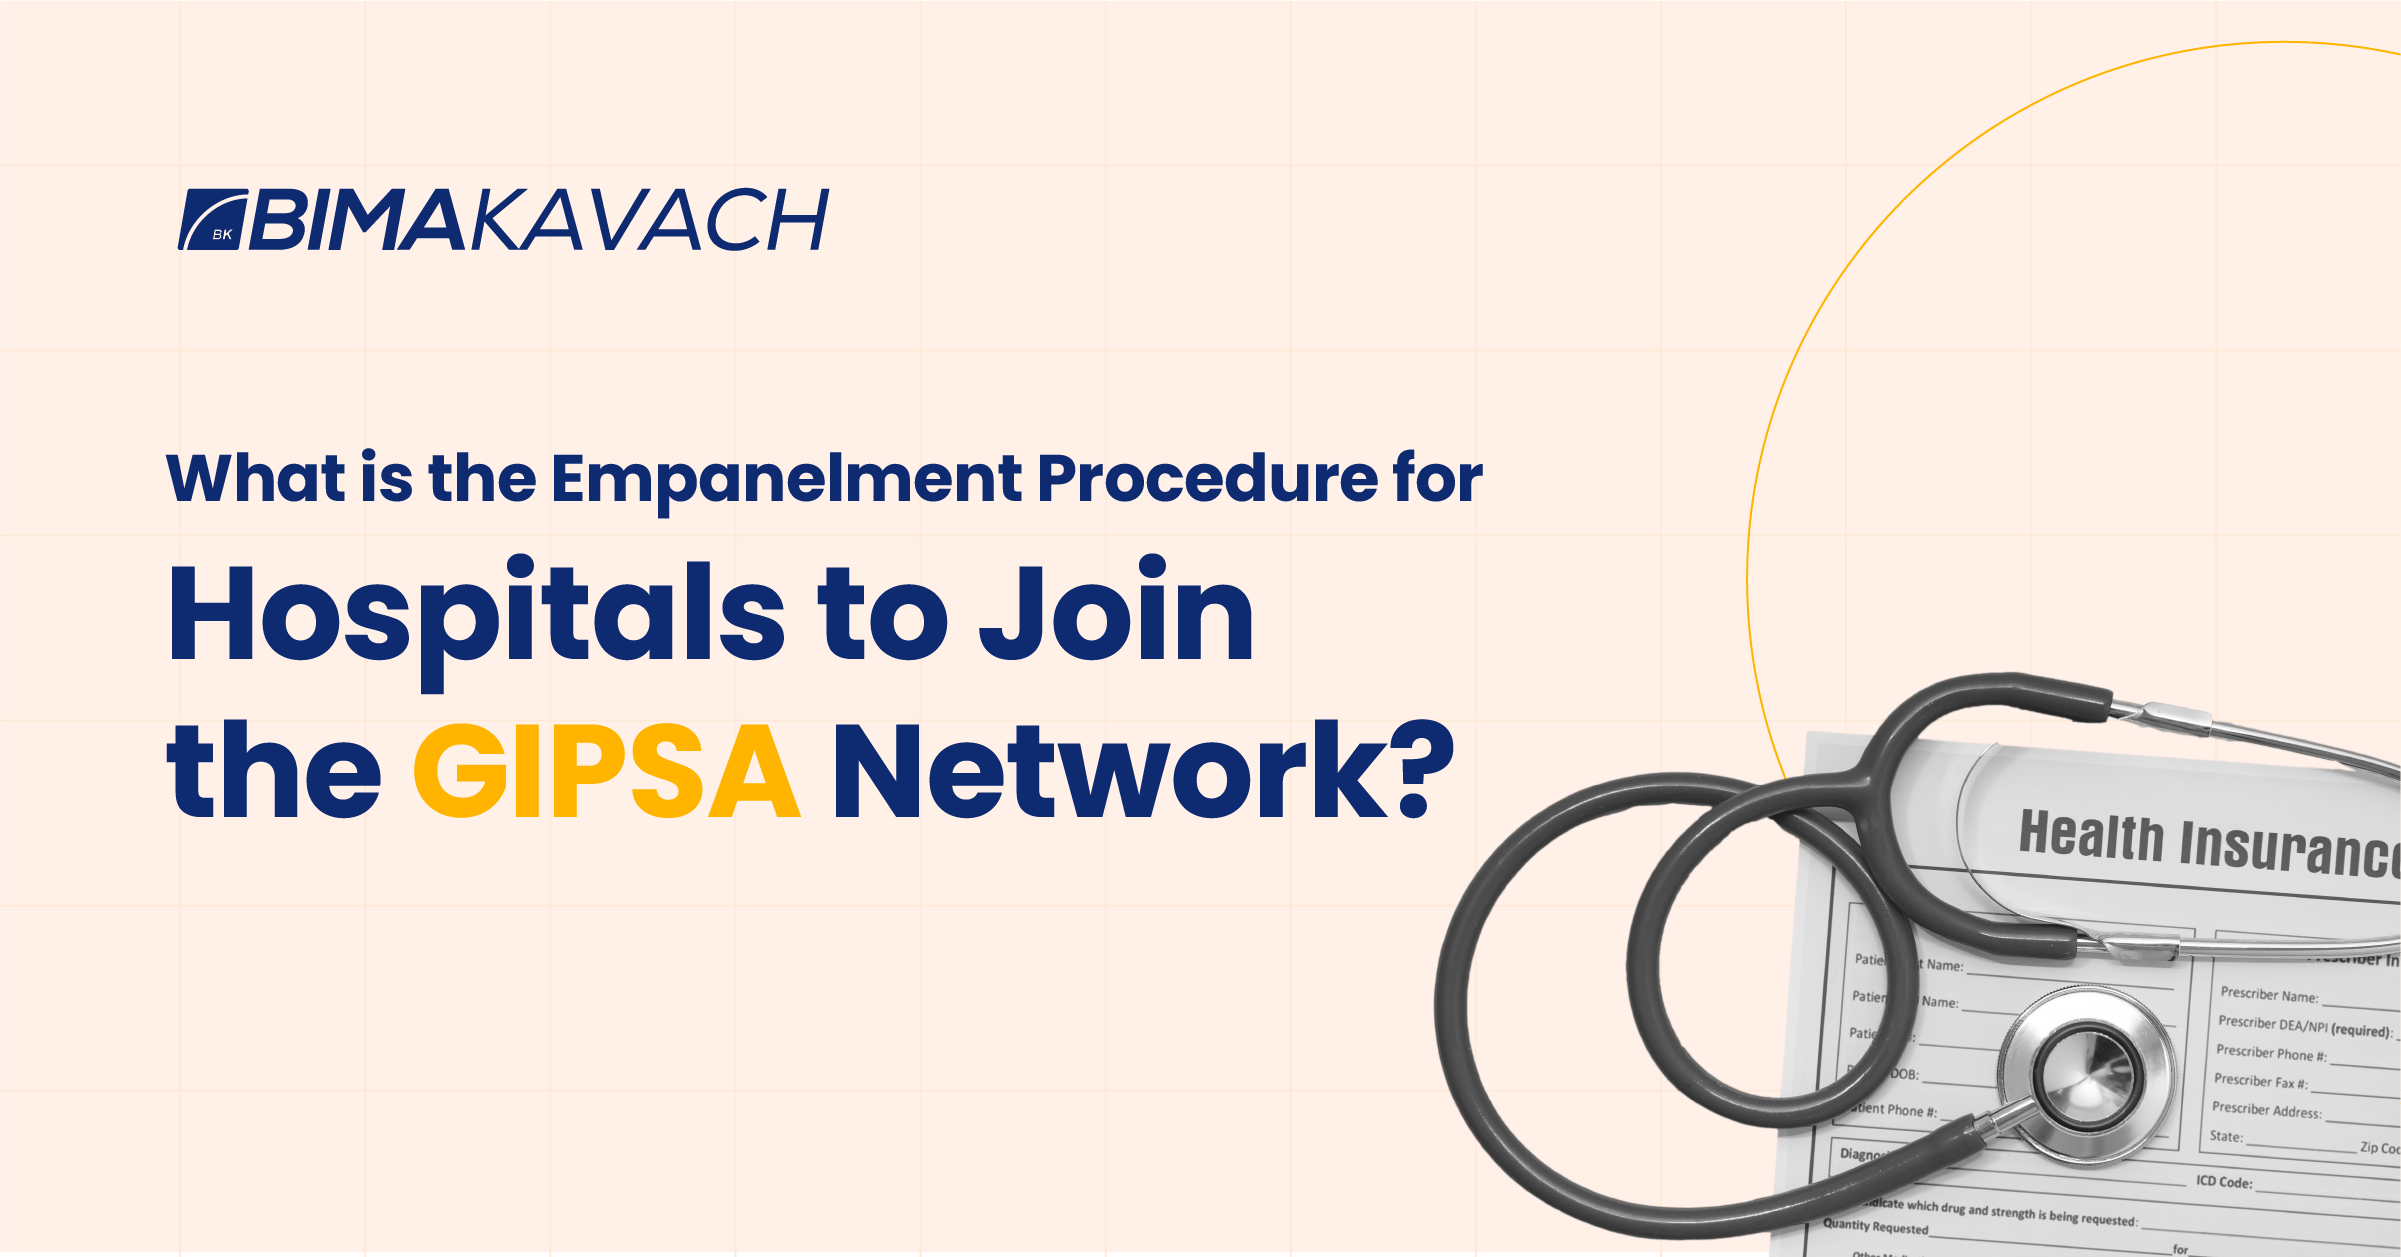 What is the Empanelment procedure for Hospitals to Join the GIPSA Network?